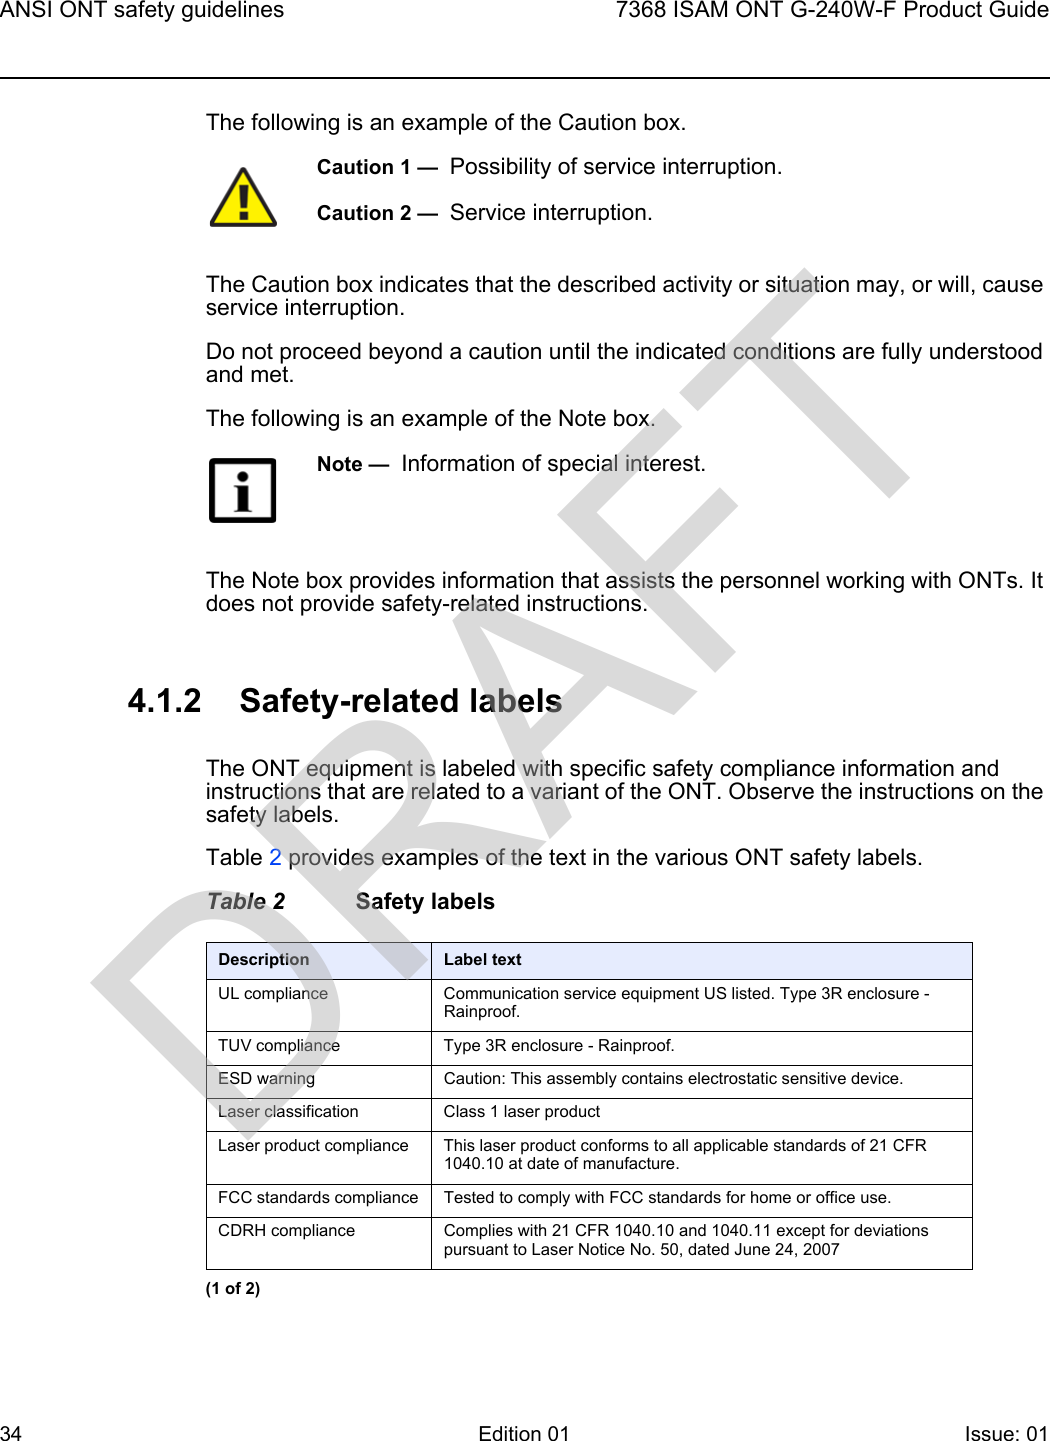 ANSI ONT safety guidelines347368 ISAM ONT G-240W-F Product GuideEdition 01 Issue: 01 The following is an example of the Caution box.The Caution box indicates that the described activity or situation may, or will, cause service interruption.Do not proceed beyond a caution until the indicated conditions are fully understood and met.The following is an example of the Note box.The Note box provides information that assists the personnel working with ONTs. It does not provide safety-related instructions.4.1.2 Safety-related labelsThe ONT equipment is labeled with specific safety compliance information and instructions that are related to a variant of the ONT. Observe the instructions on the safety labels.Table 2 provides examples of the text in the various ONT safety labels.Table 2 Safety labelsCaution 1 —  Possibility of service interruption.Caution 2 —  Service interruption.Note —  Information of special interest.Description Label textUL compliance Communication service equipment US listed. Type 3R enclosure - Rainproof.TUV compliance Type 3R enclosure - Rainproof.ESD warning Caution: This assembly contains electrostatic sensitive device.Laser classification Class 1 laser productLaser product compliance This laser product conforms to all applicable standards of 21 CFR 1040.10 at date of manufacture.FCC standards compliance Tested to comply with FCC standards for home or office use.CDRH compliance Complies with 21 CFR 1040.10 and 1040.11 except for deviations pursuant to Laser Notice No. 50, dated June 24, 2007(1 of 2)DRAFT